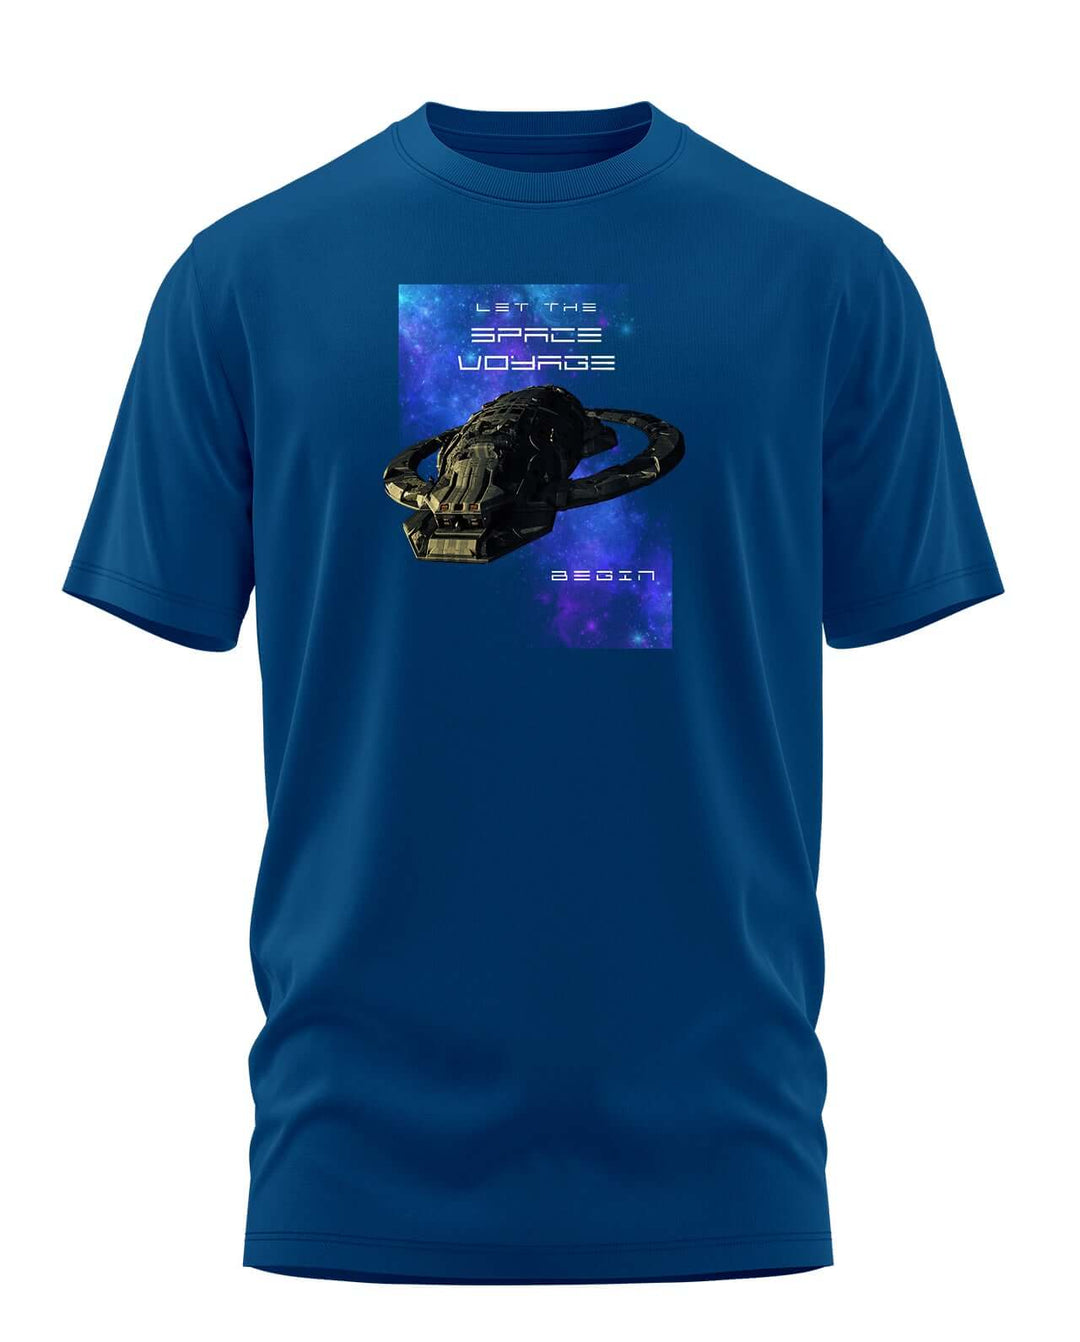 Let the Space Voyage Begin T-shirt